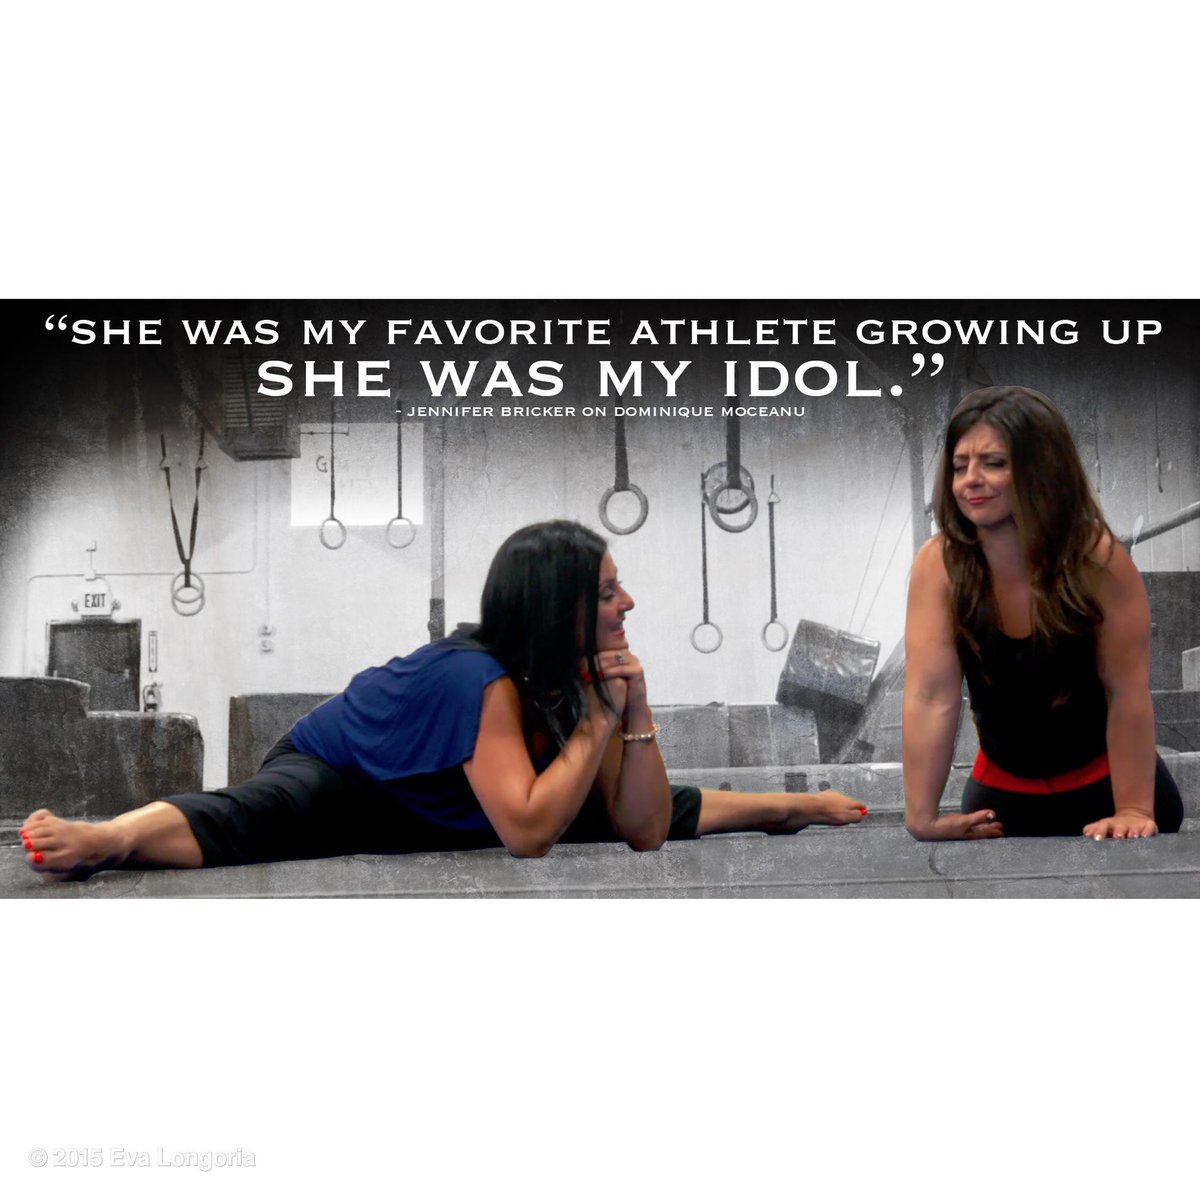 The incredible story of @JenBricker1 & @Dmoceanu. Latest in my #Versus series airs tomorrow: http://t.co/zDzxJ5AxRi http://t.co/NzmCHsNoet